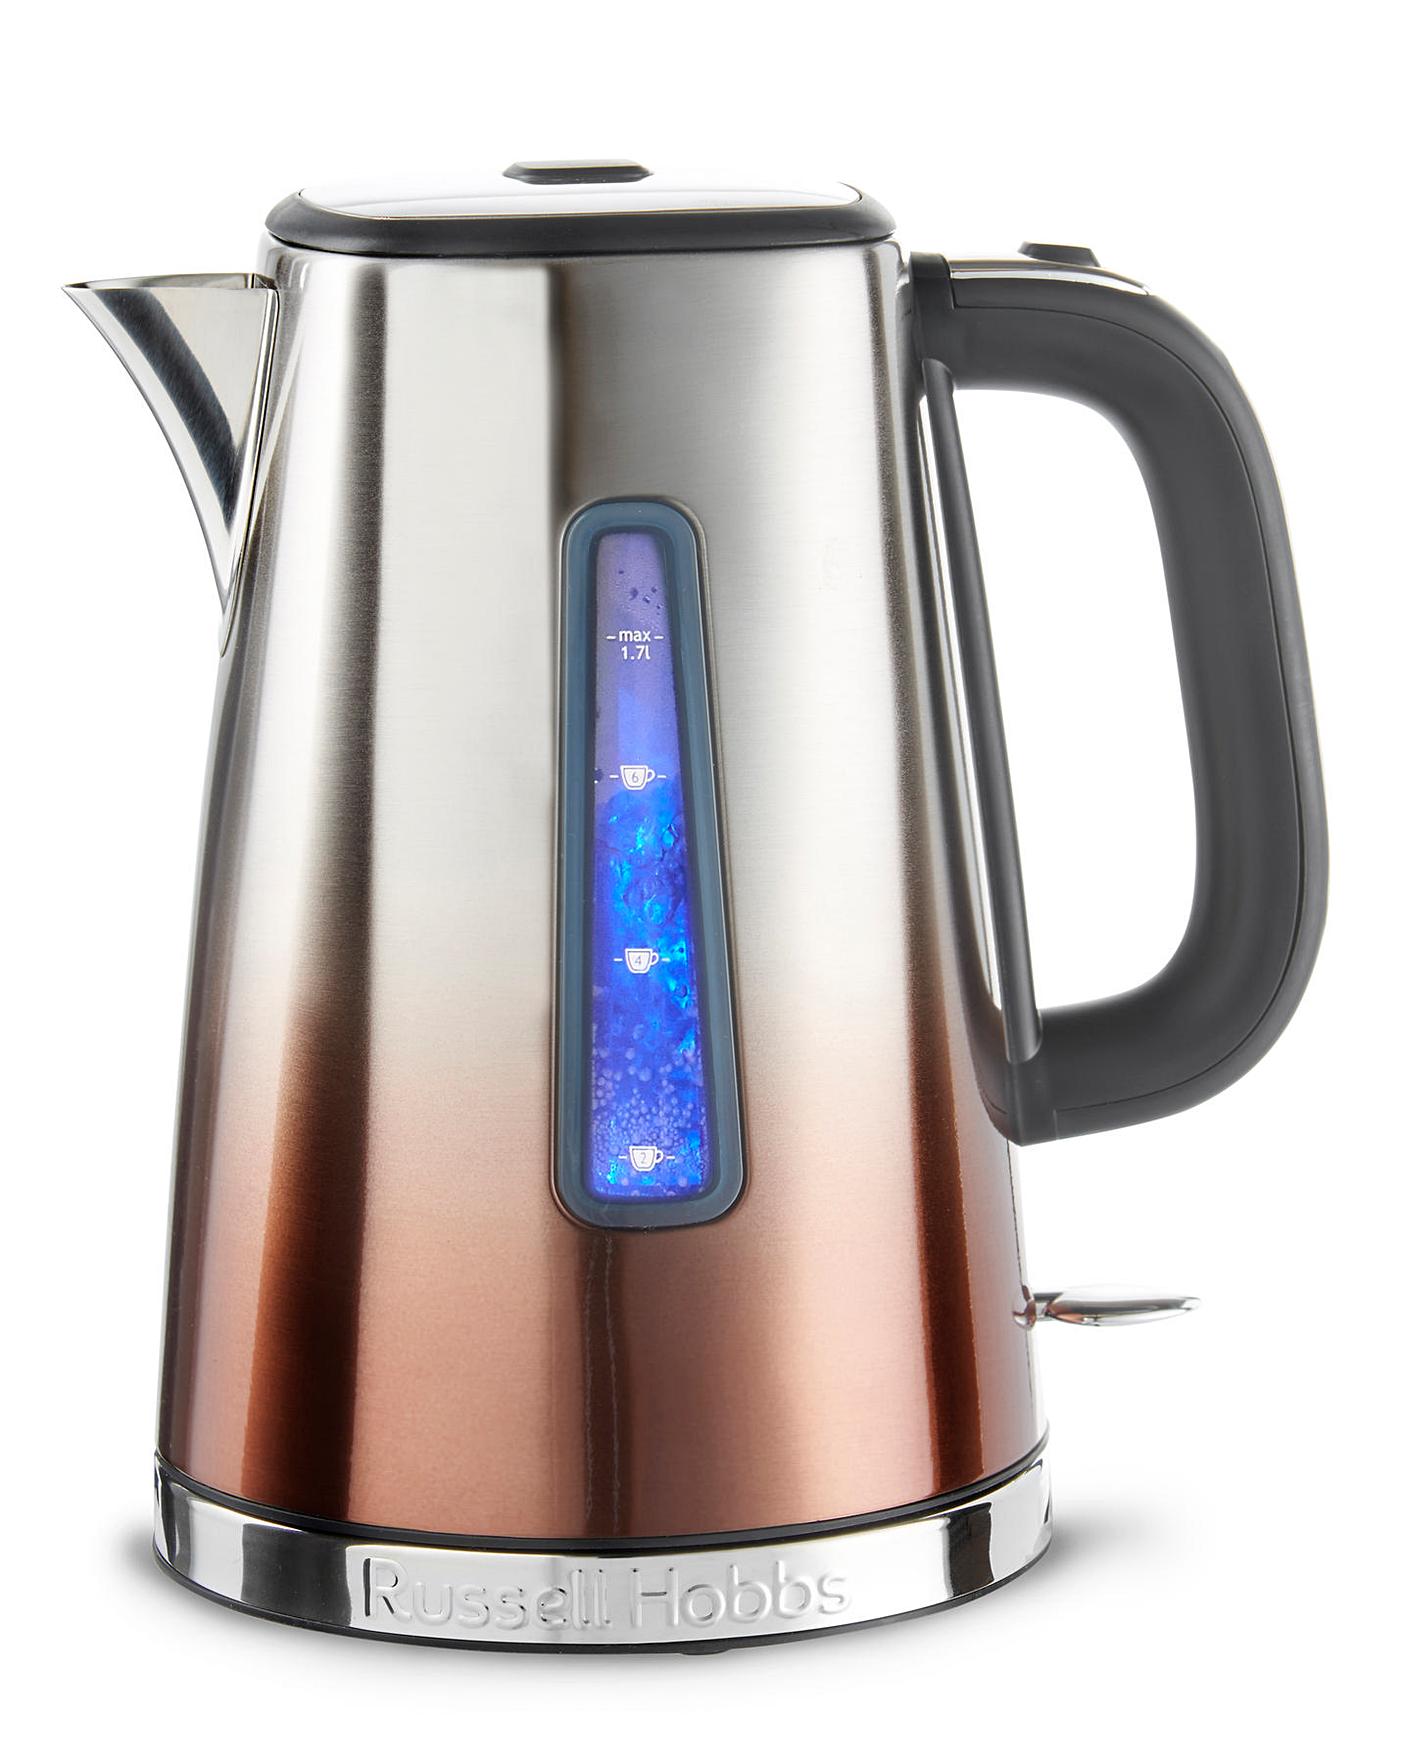 Russell Hobbs Kettles  Discover Our Range of Electric Kettles